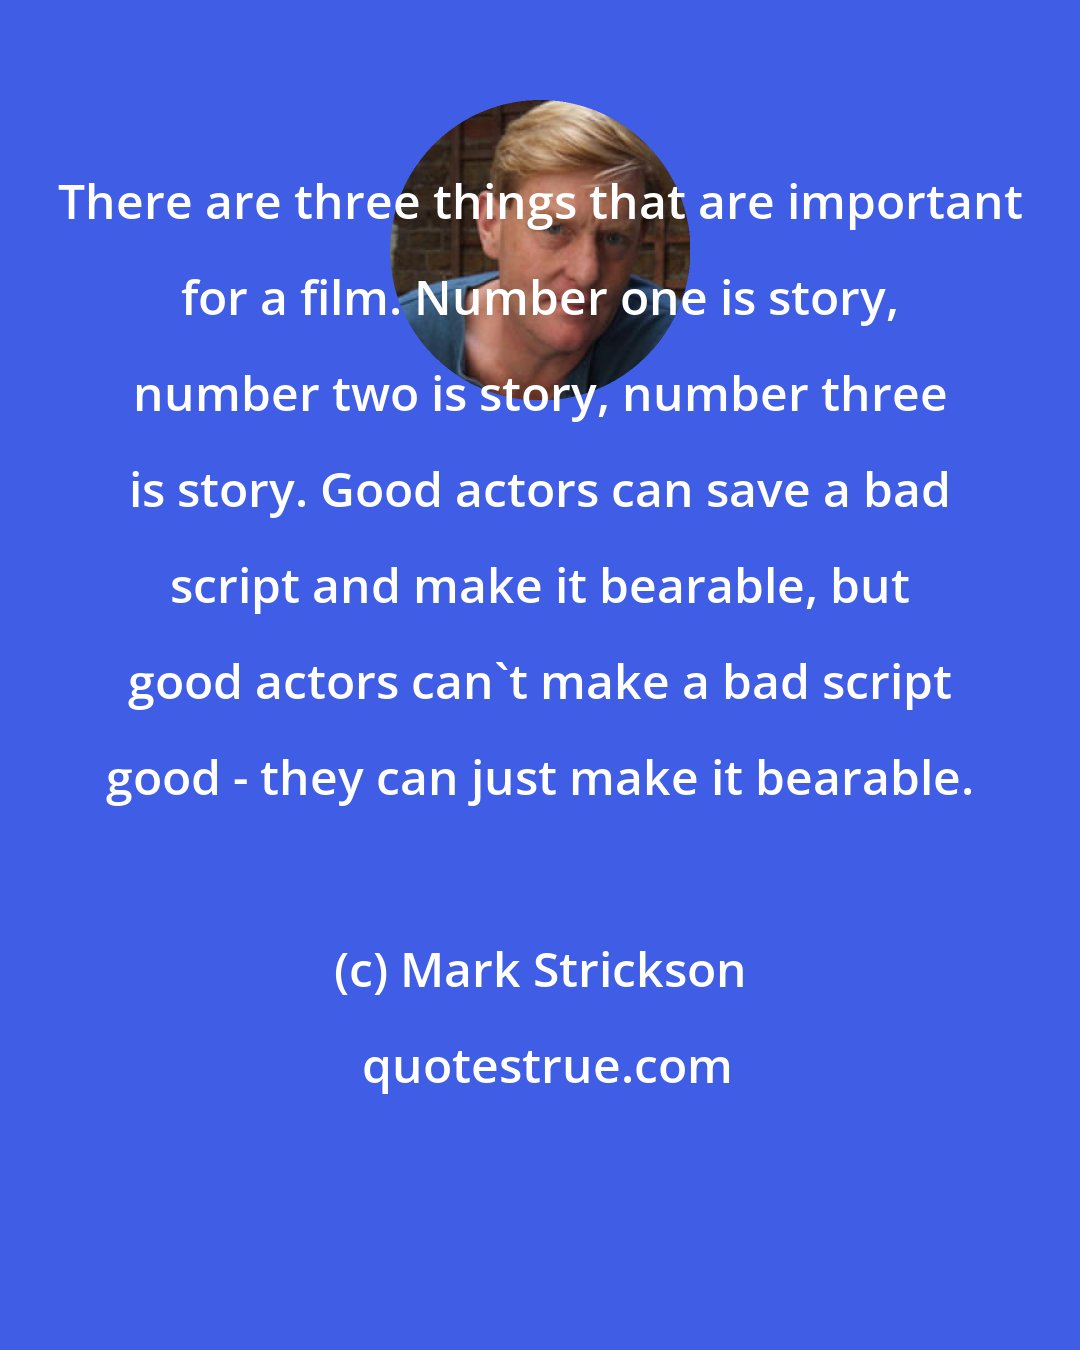 Mark Strickson: There are three things that are important for a film. Number one is story, number two is story, number three is story. Good actors can save a bad script and make it bearable, but good actors can't make a bad script good - they can just make it bearable.